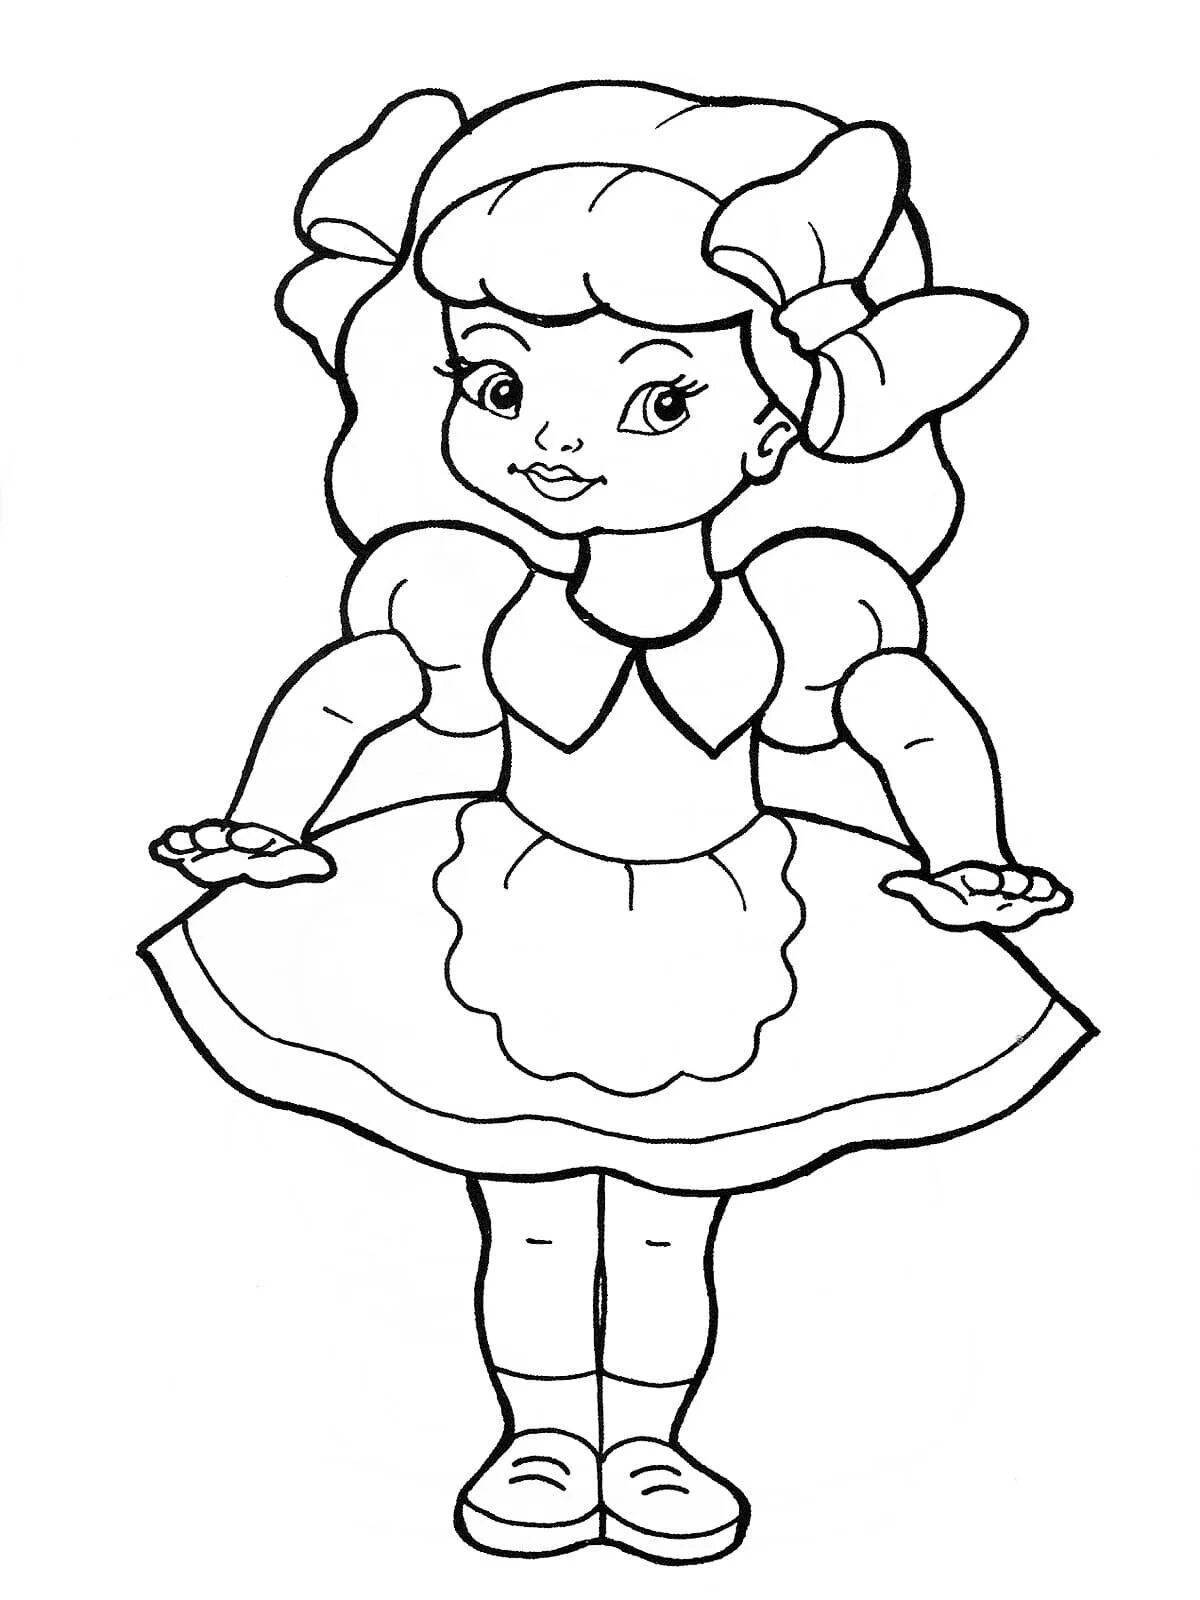 Cute doll coloring book